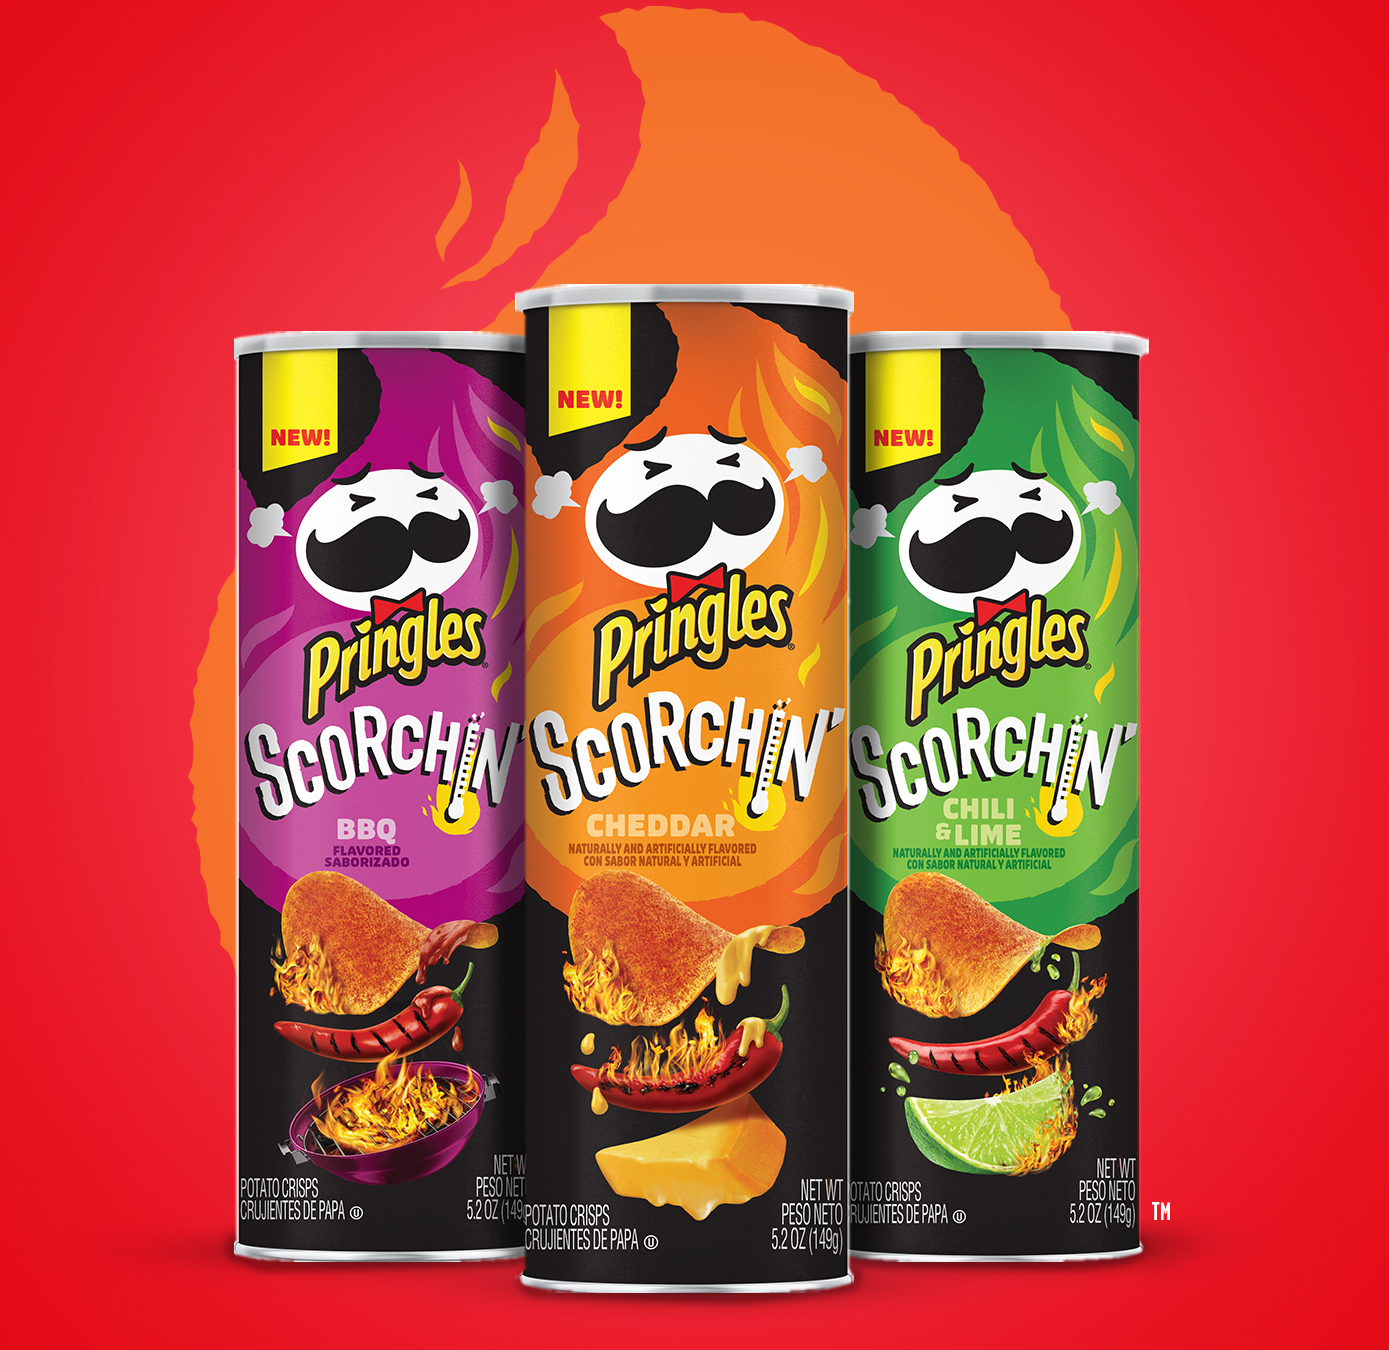 Pringles is releasing 3 new scorchinghot chip flavors